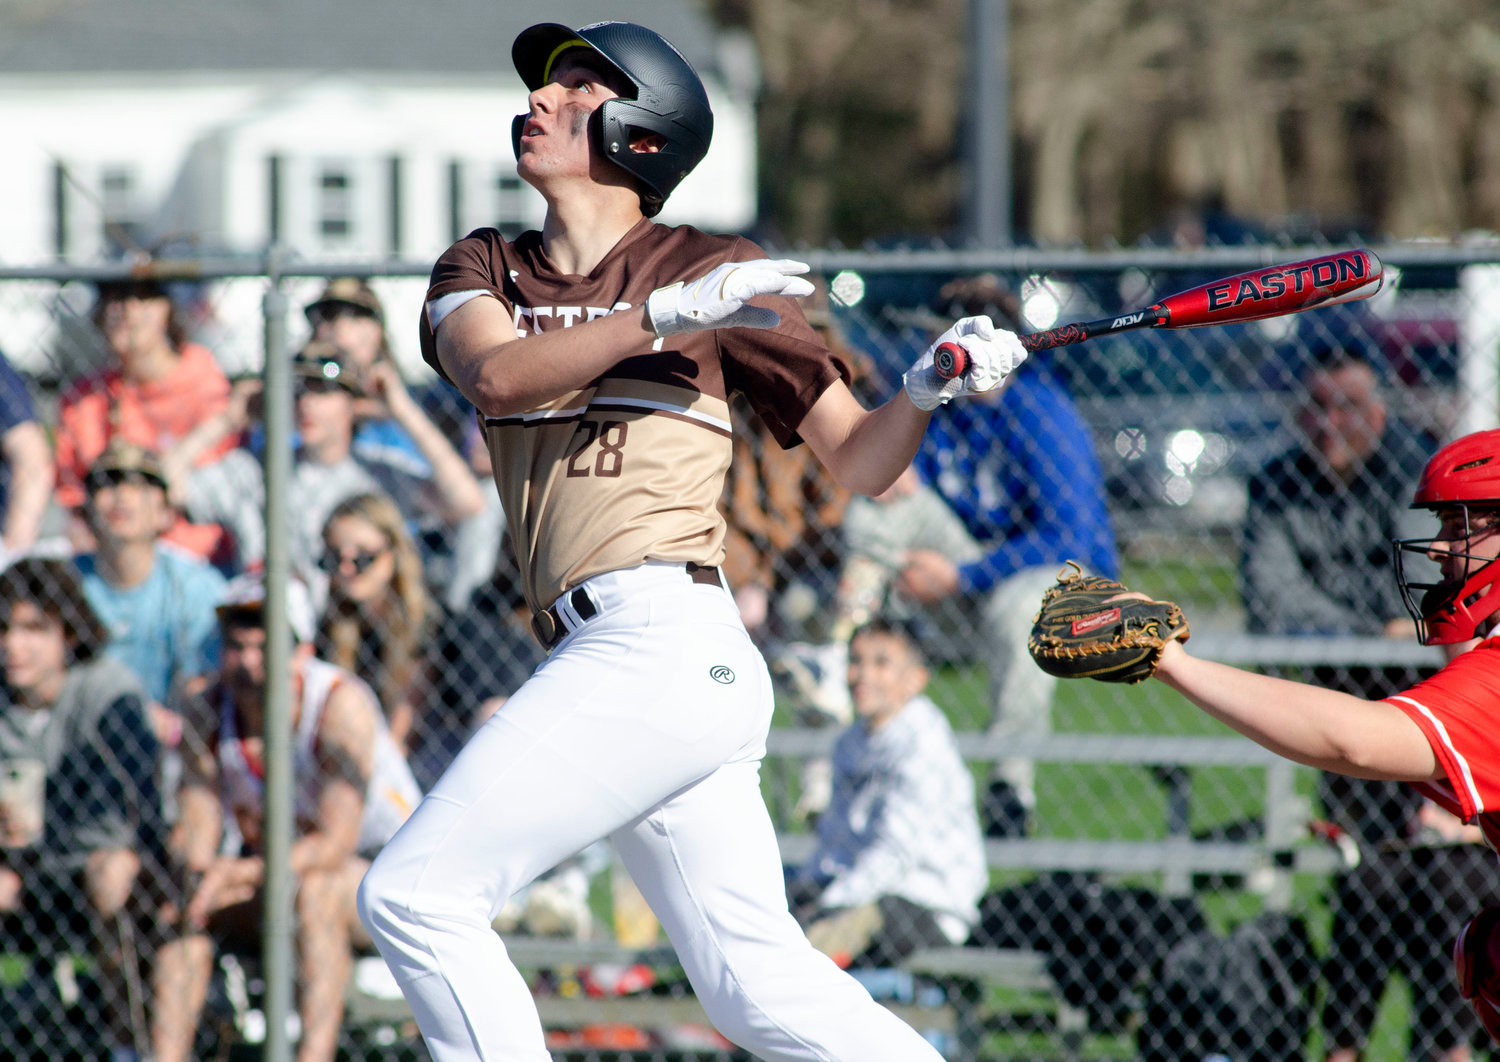 Max Morotti checks the flight of the ball as he follows through on his swing during Westport's game against Bishop Connolly last week. Morotti had a pair of hits and scored 2 runs in the game.